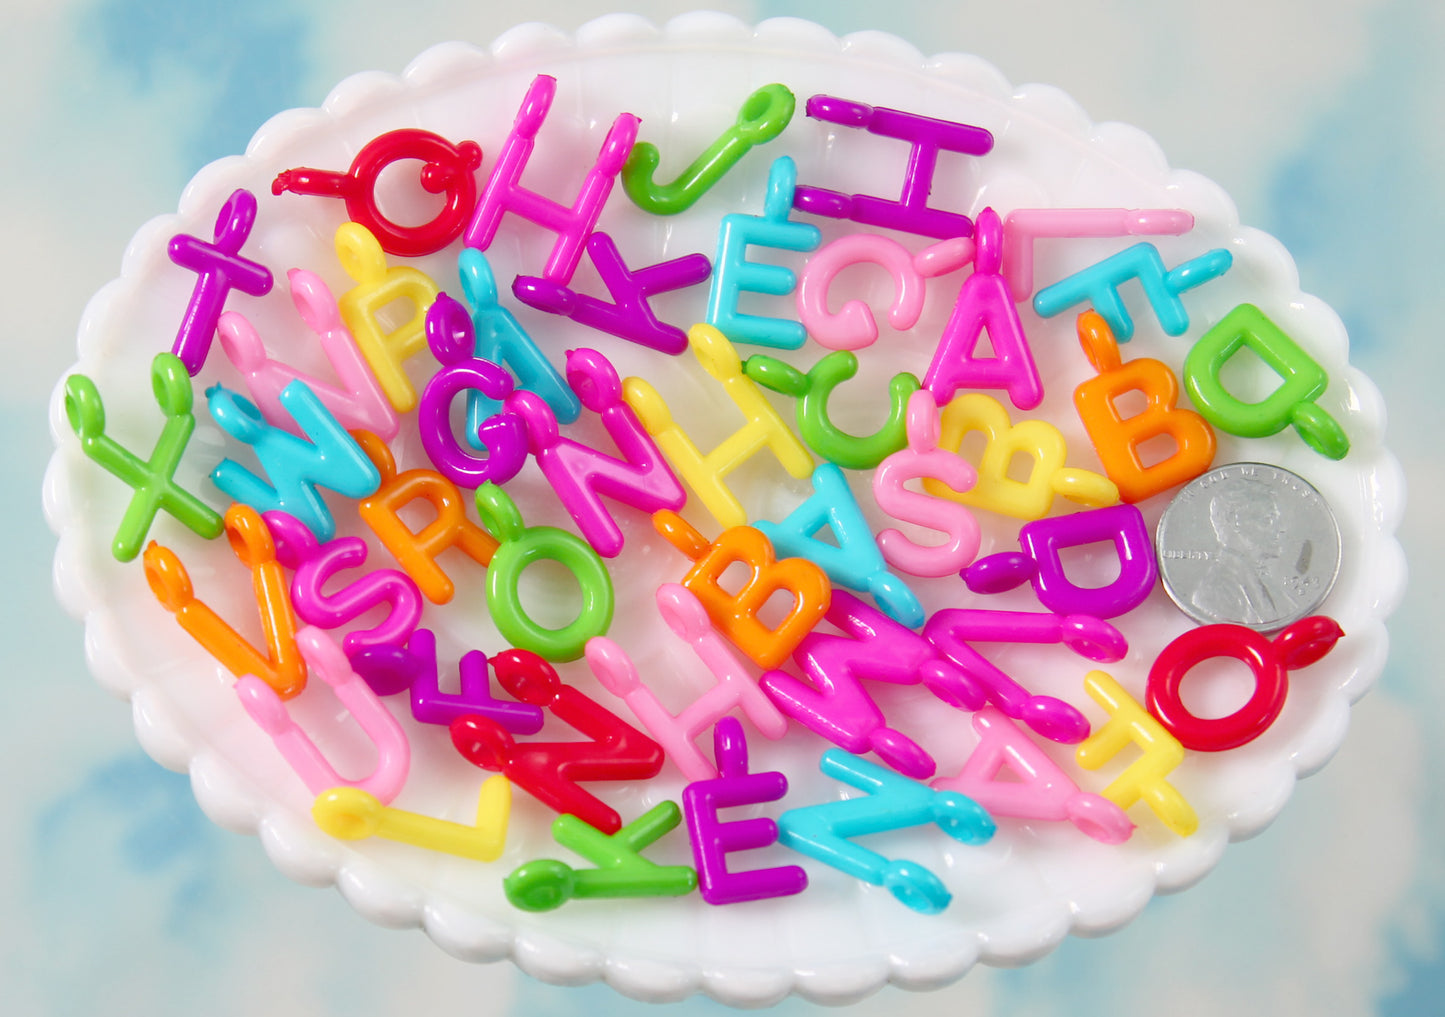 Plastic Letter Charms - 20mm Alphabet Letter Words Plastic or Acrylic Charms or Pendants - approx. 160 pcs set